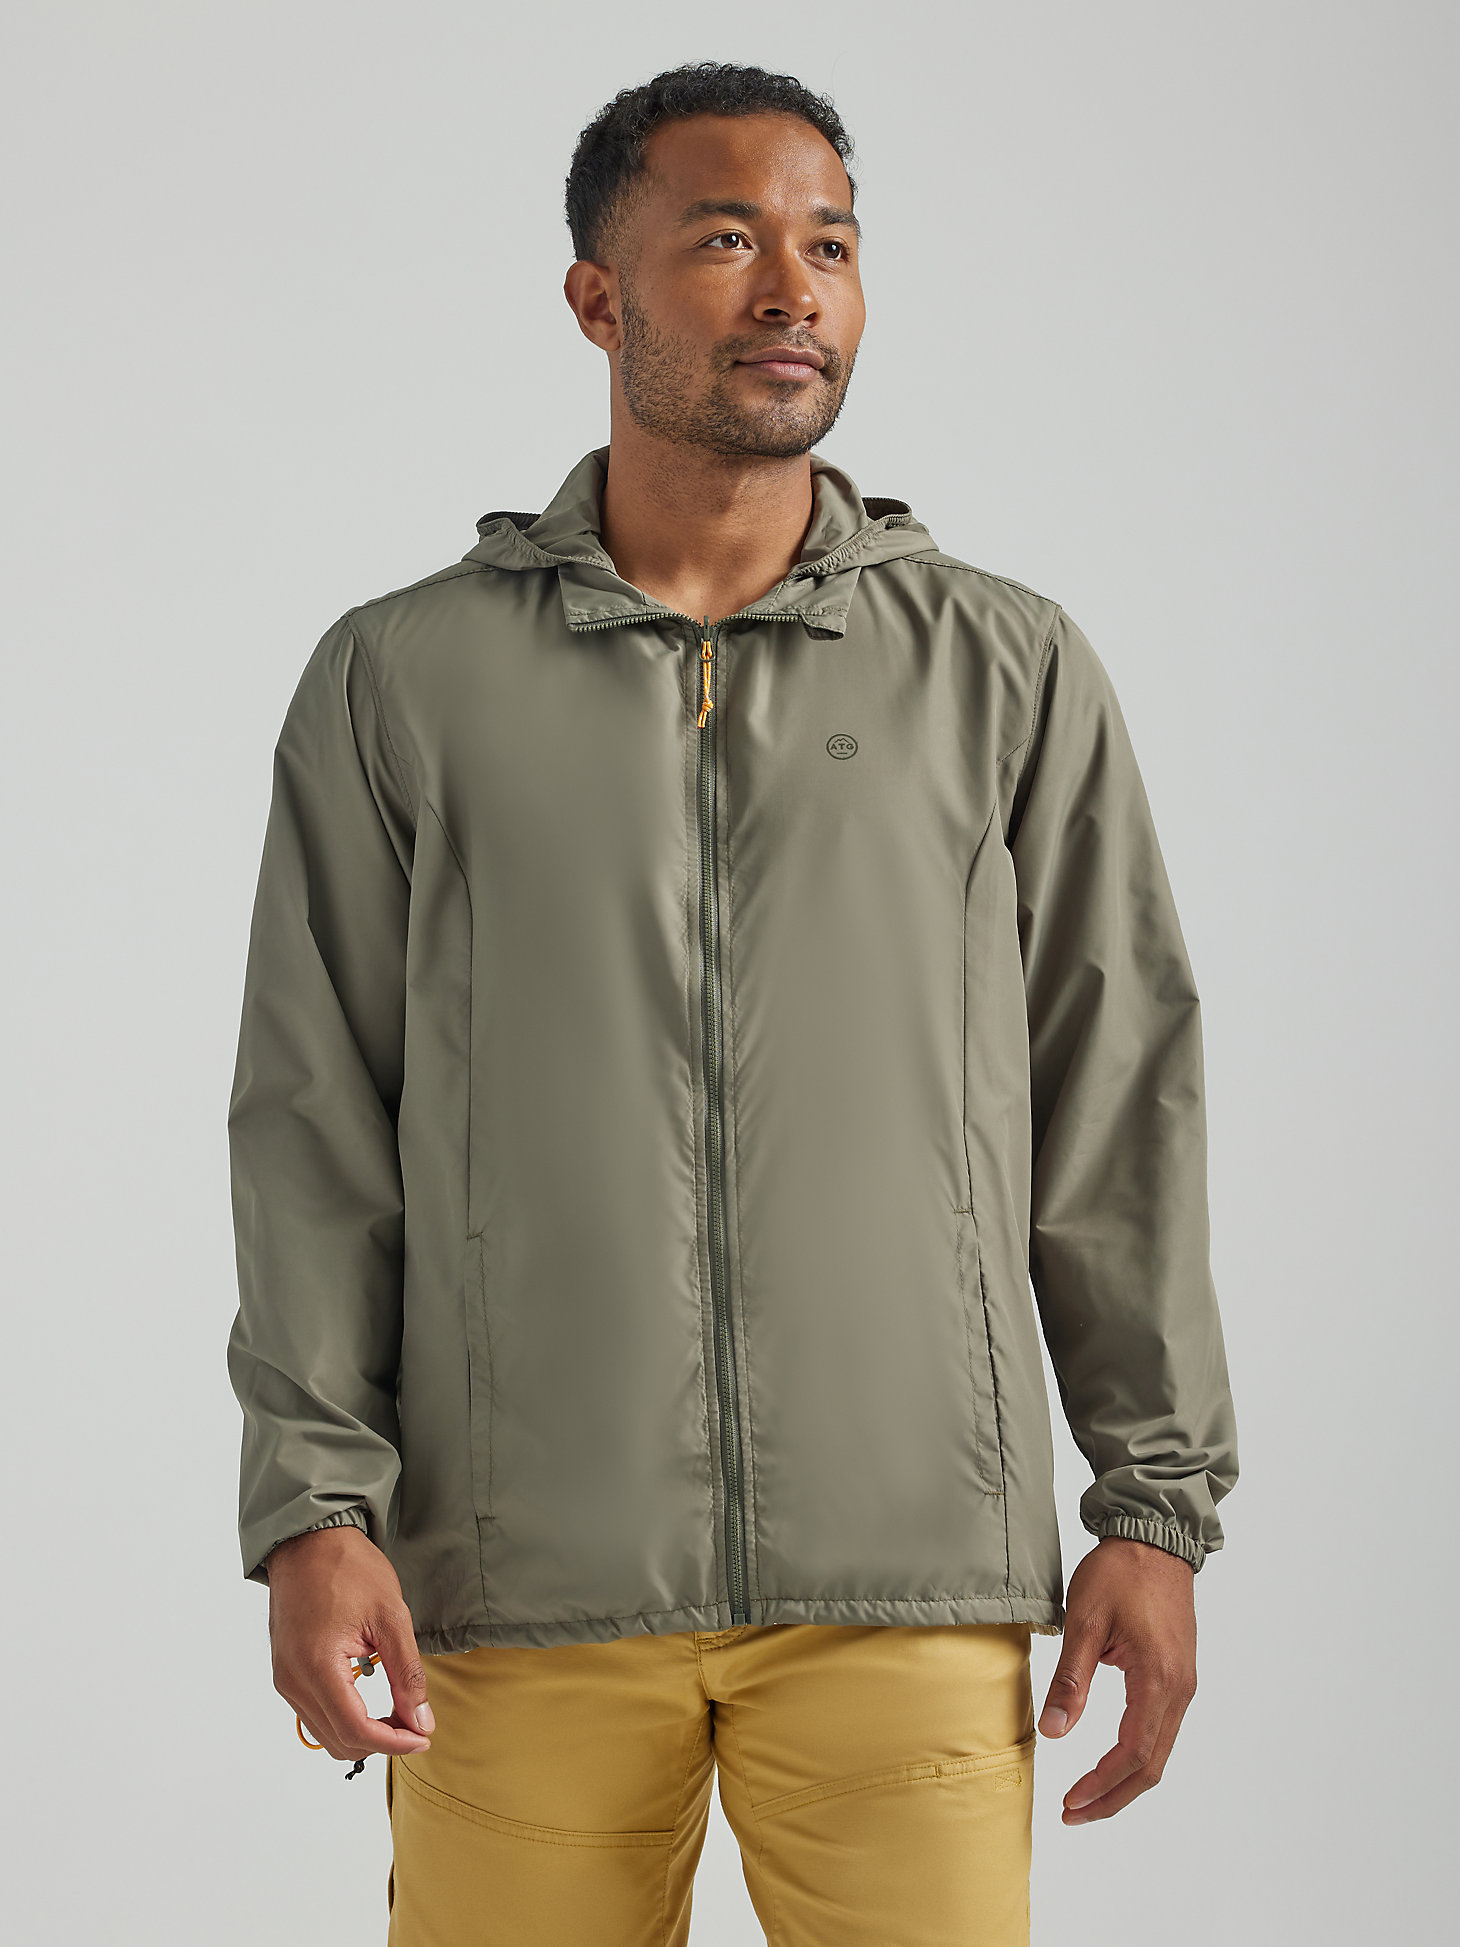 Lightweight Packable Jacket in Dusty Olive main view